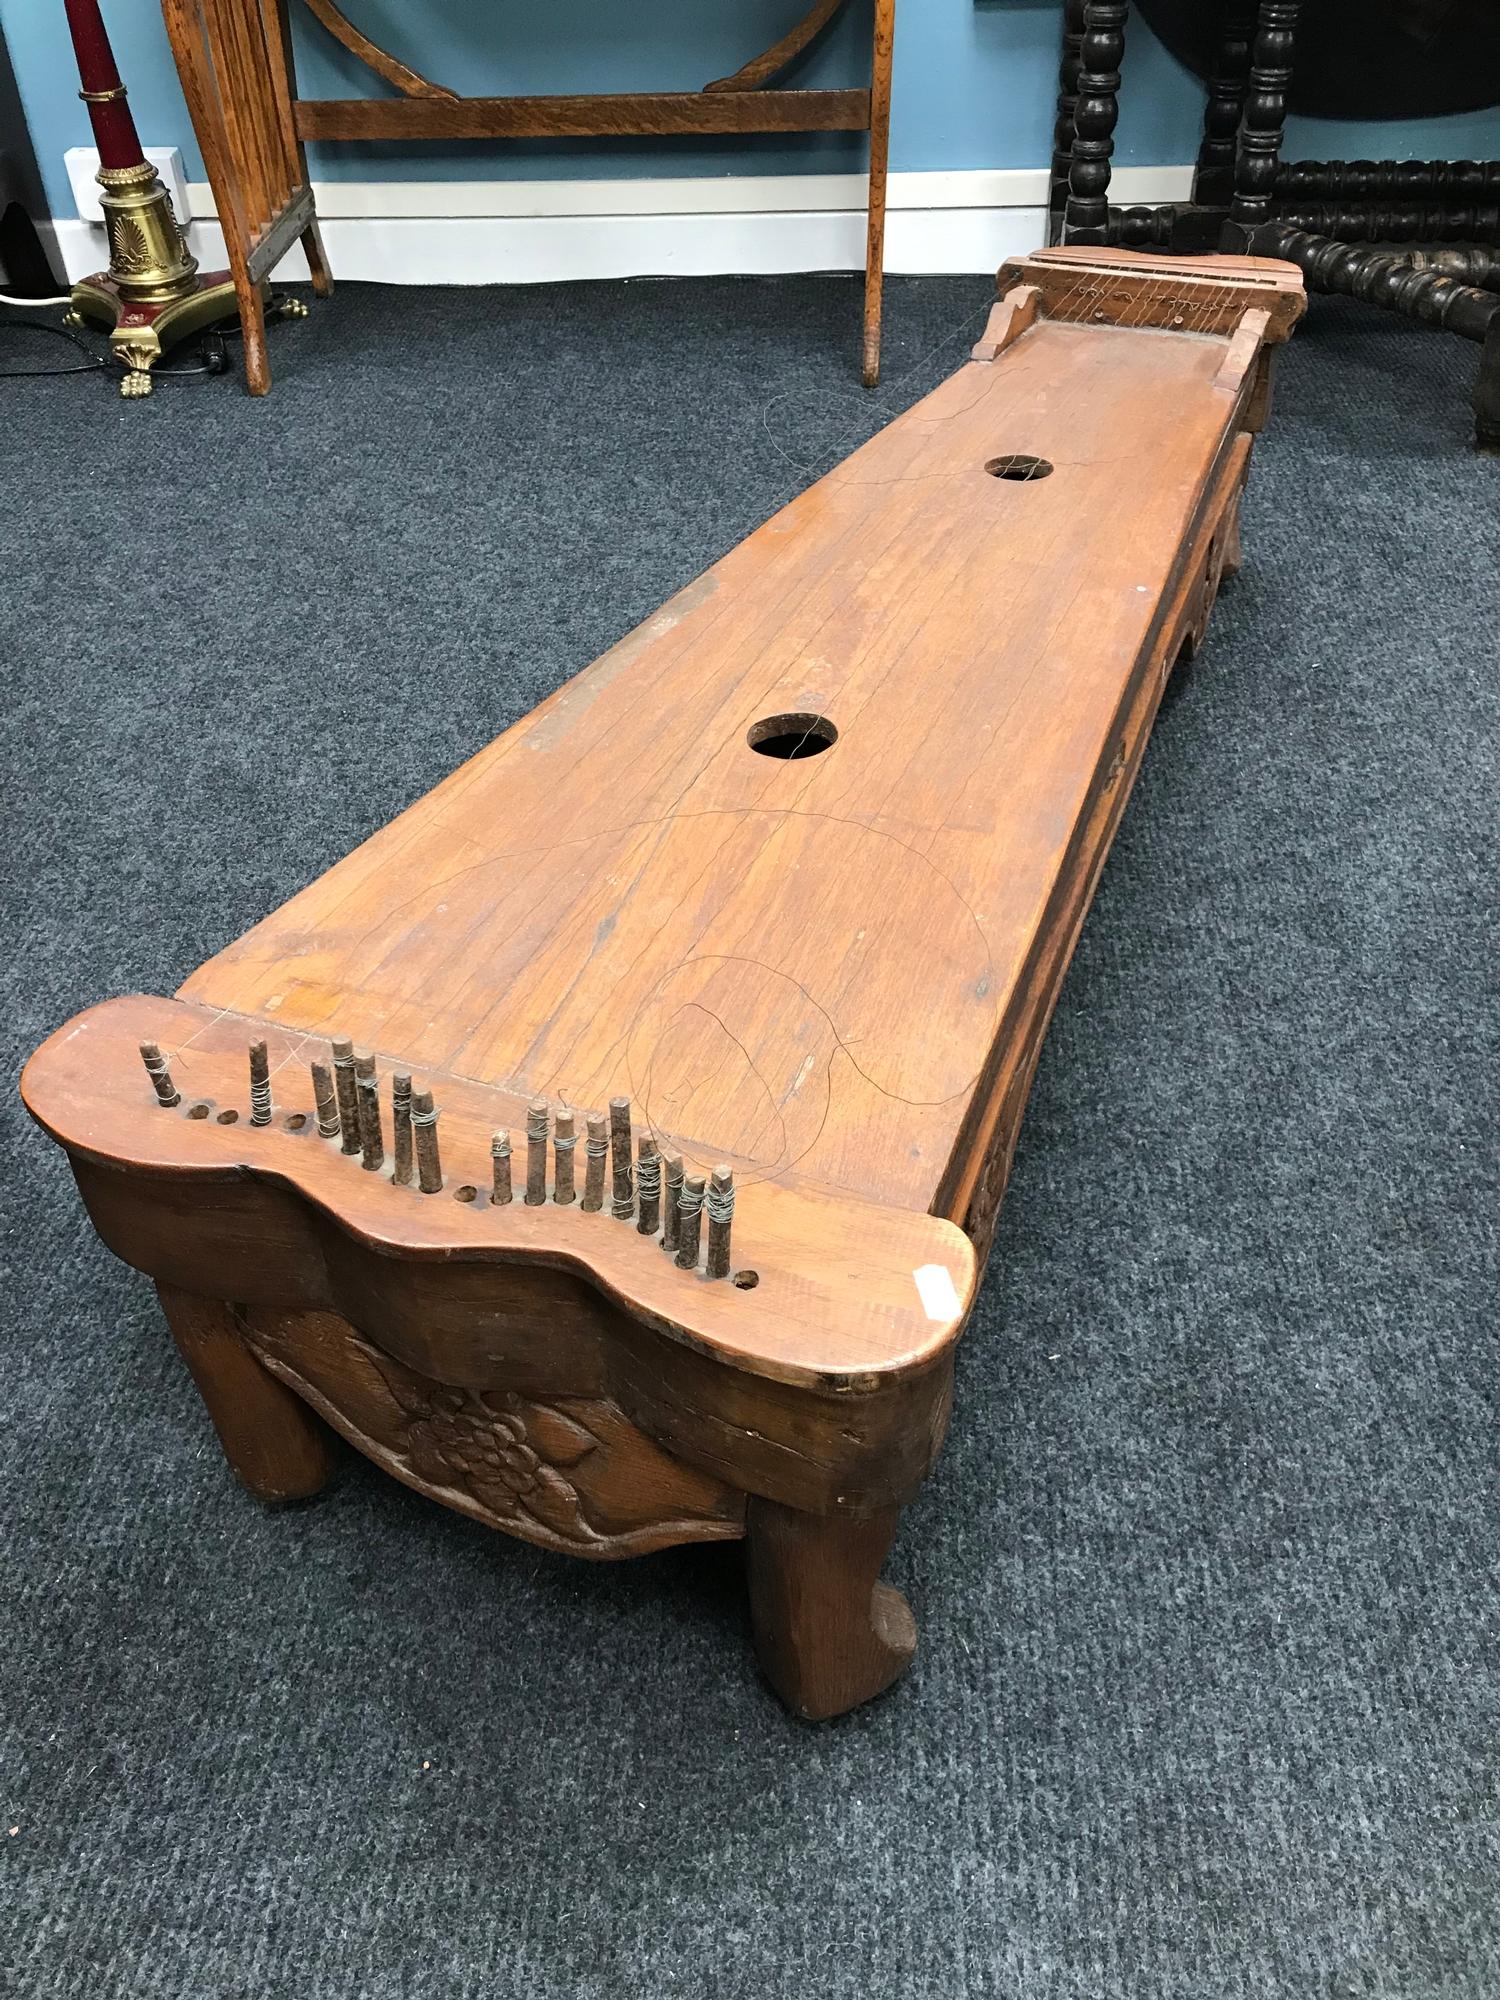 A Large 19th Century Malaysian hardwood Zither/ Guqin sit down instrument. Comes with wooden tone/